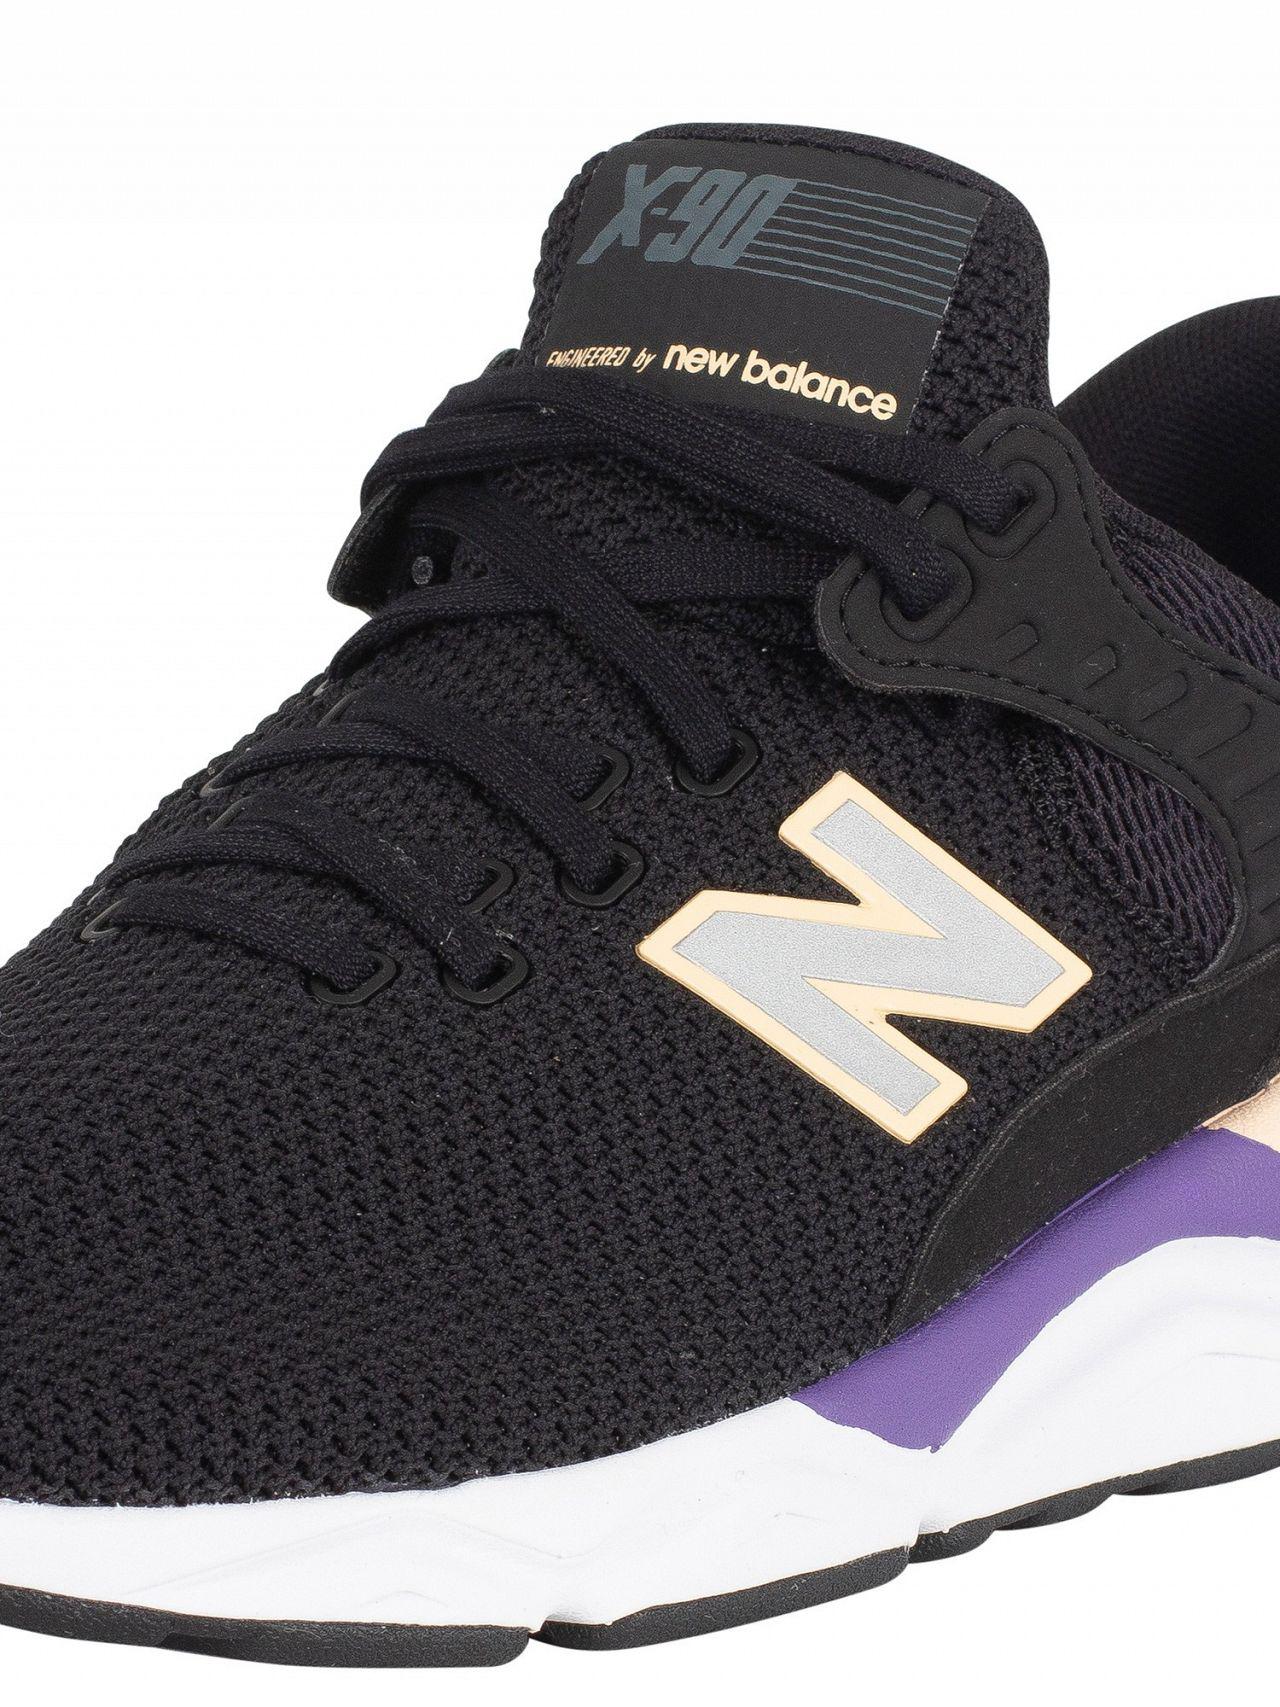 New Balance Lace Black/purple/pink X-90 Trainers for Men - Lyst